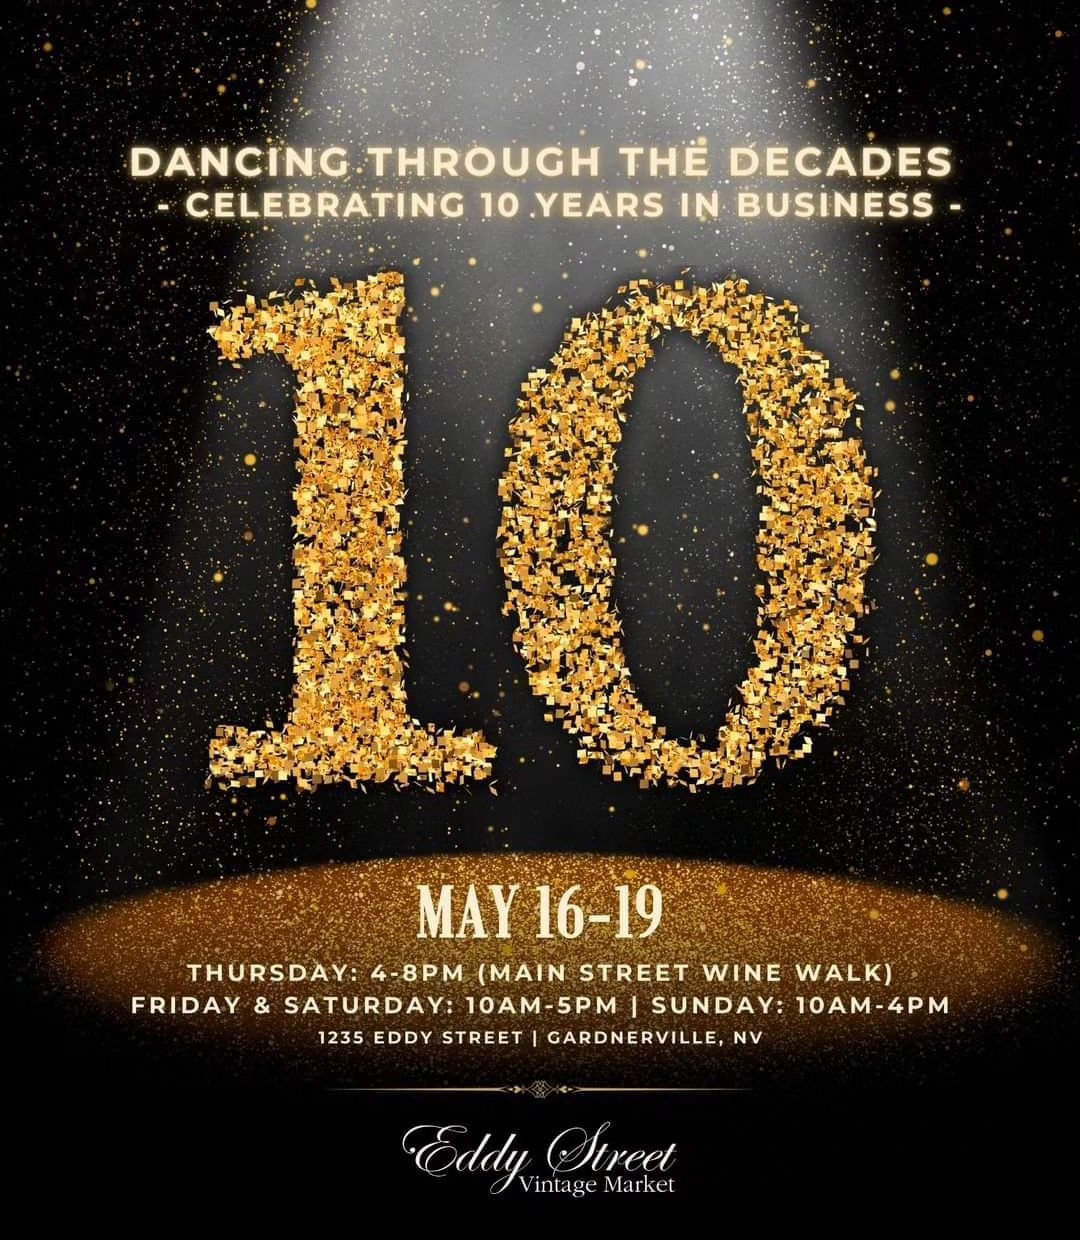 SAVE THE DATE! Join us in celebration of 10 years in business during our Dancing through the Decades 10th Anniversary Pop-up! 🎉 From the roaring '20s, to the rock-and-roll '50s, into the roller disco '70s - each room has been transformed into a diff